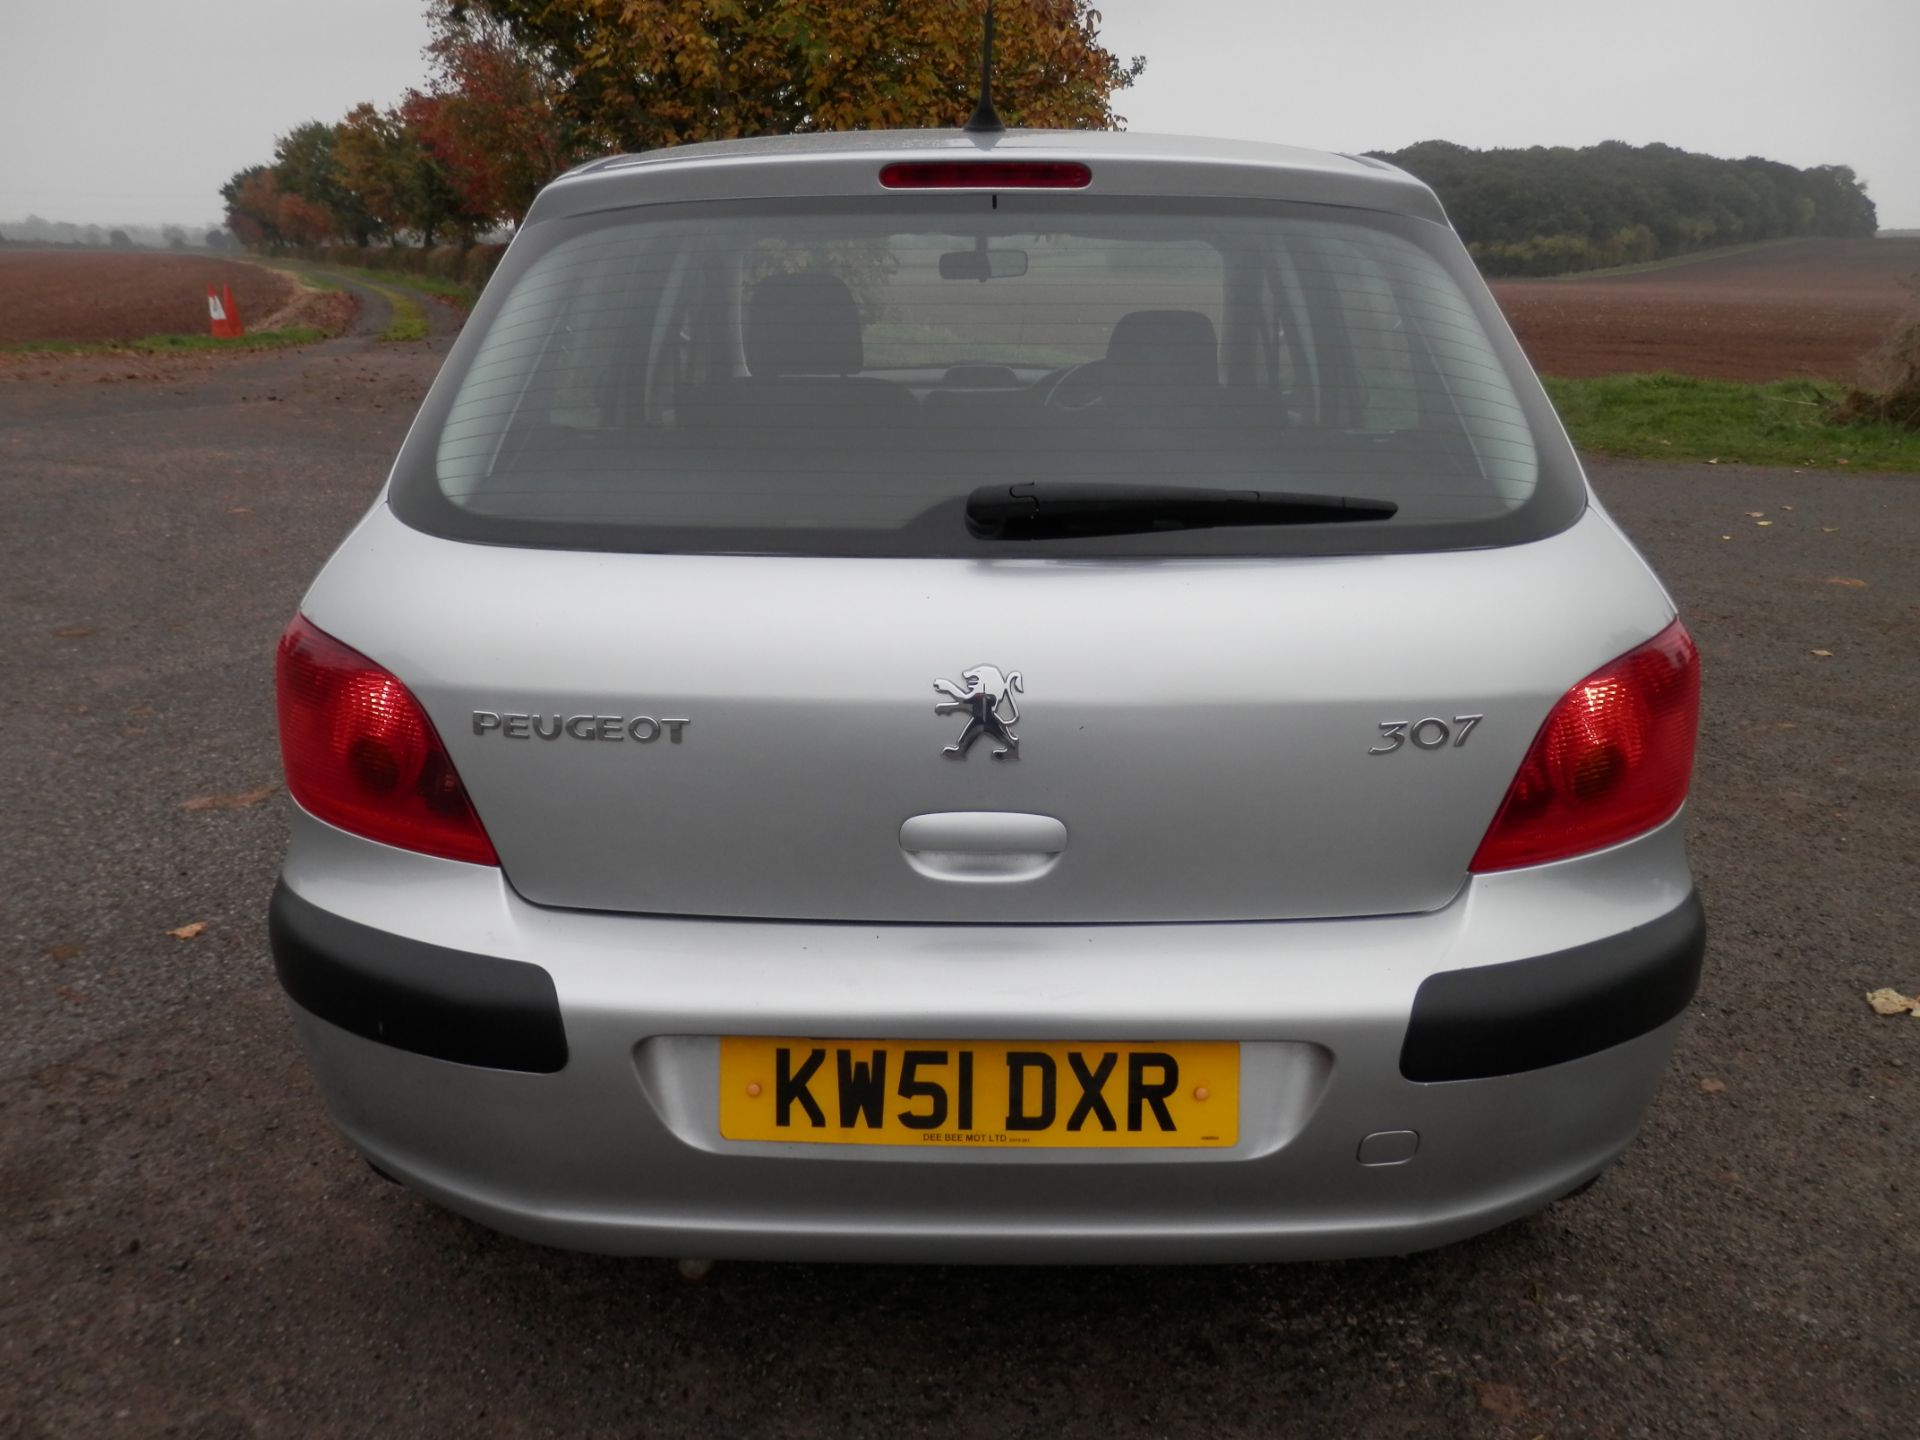 2002/51 PLATE PEUGEOT 307 1.6 LX AUTOMATIC, ONLY 51K WARRANTED MILES & MOT MAY 2017, GREAT CAR. - Image 3 of 22